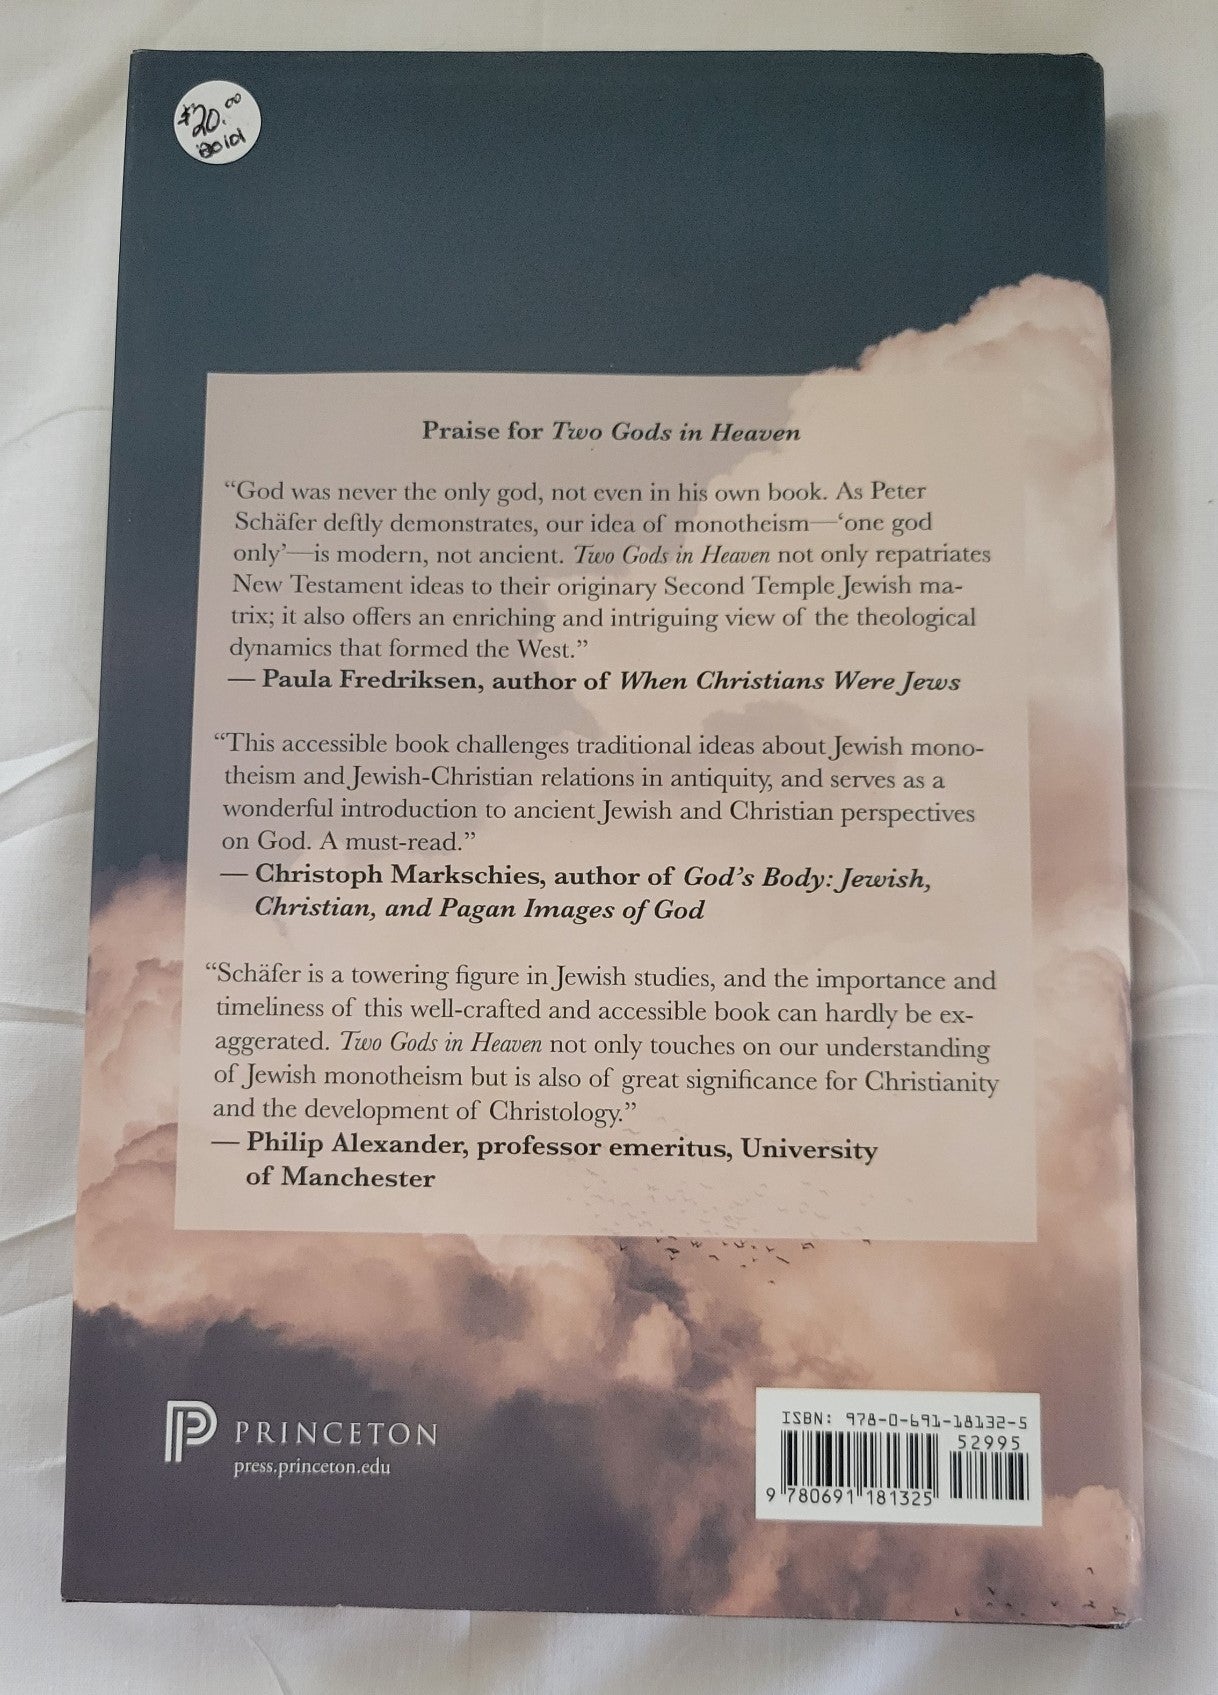 Used book for sale “Two Gods in Heaven: Jewish Concepts of God in Antiquity” written by Peter Schäfer. Back cover.